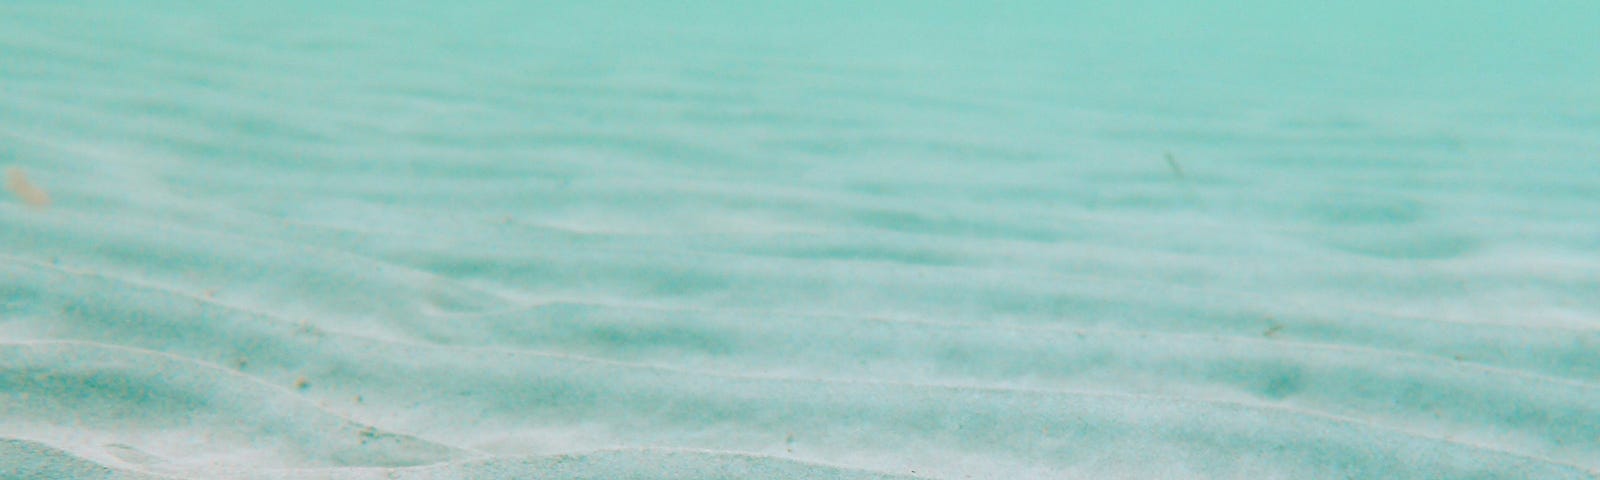 Starfish on a Rippled sea floor, pale turquoise water.